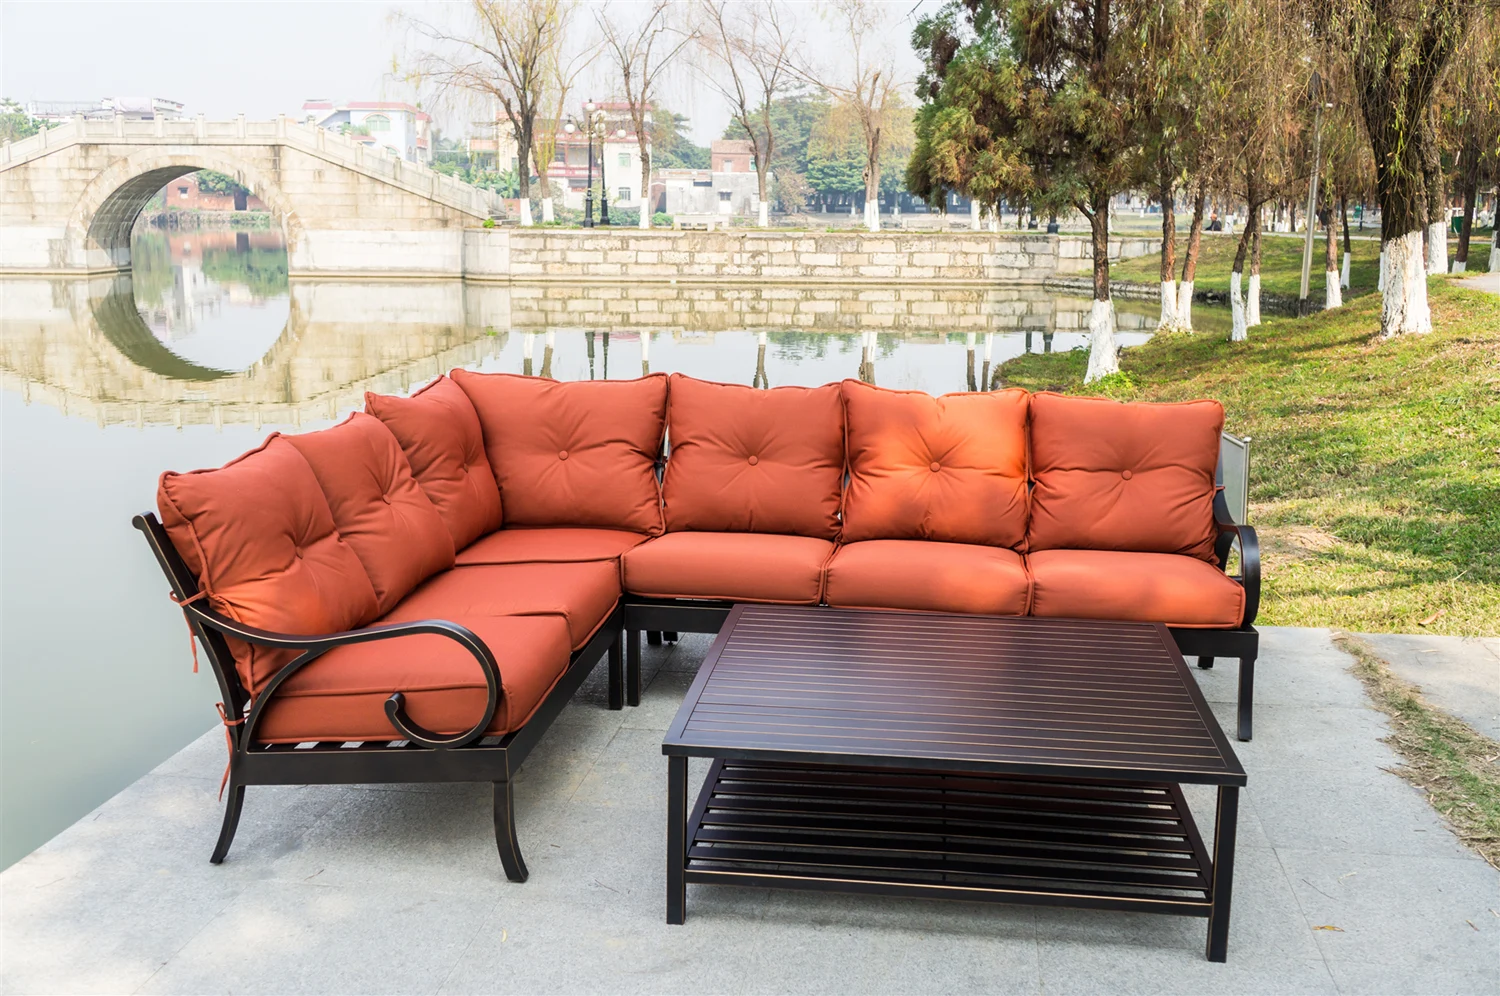 All-weather Outdoor Furniture Outdoor Aluminum Sofas With Cushions